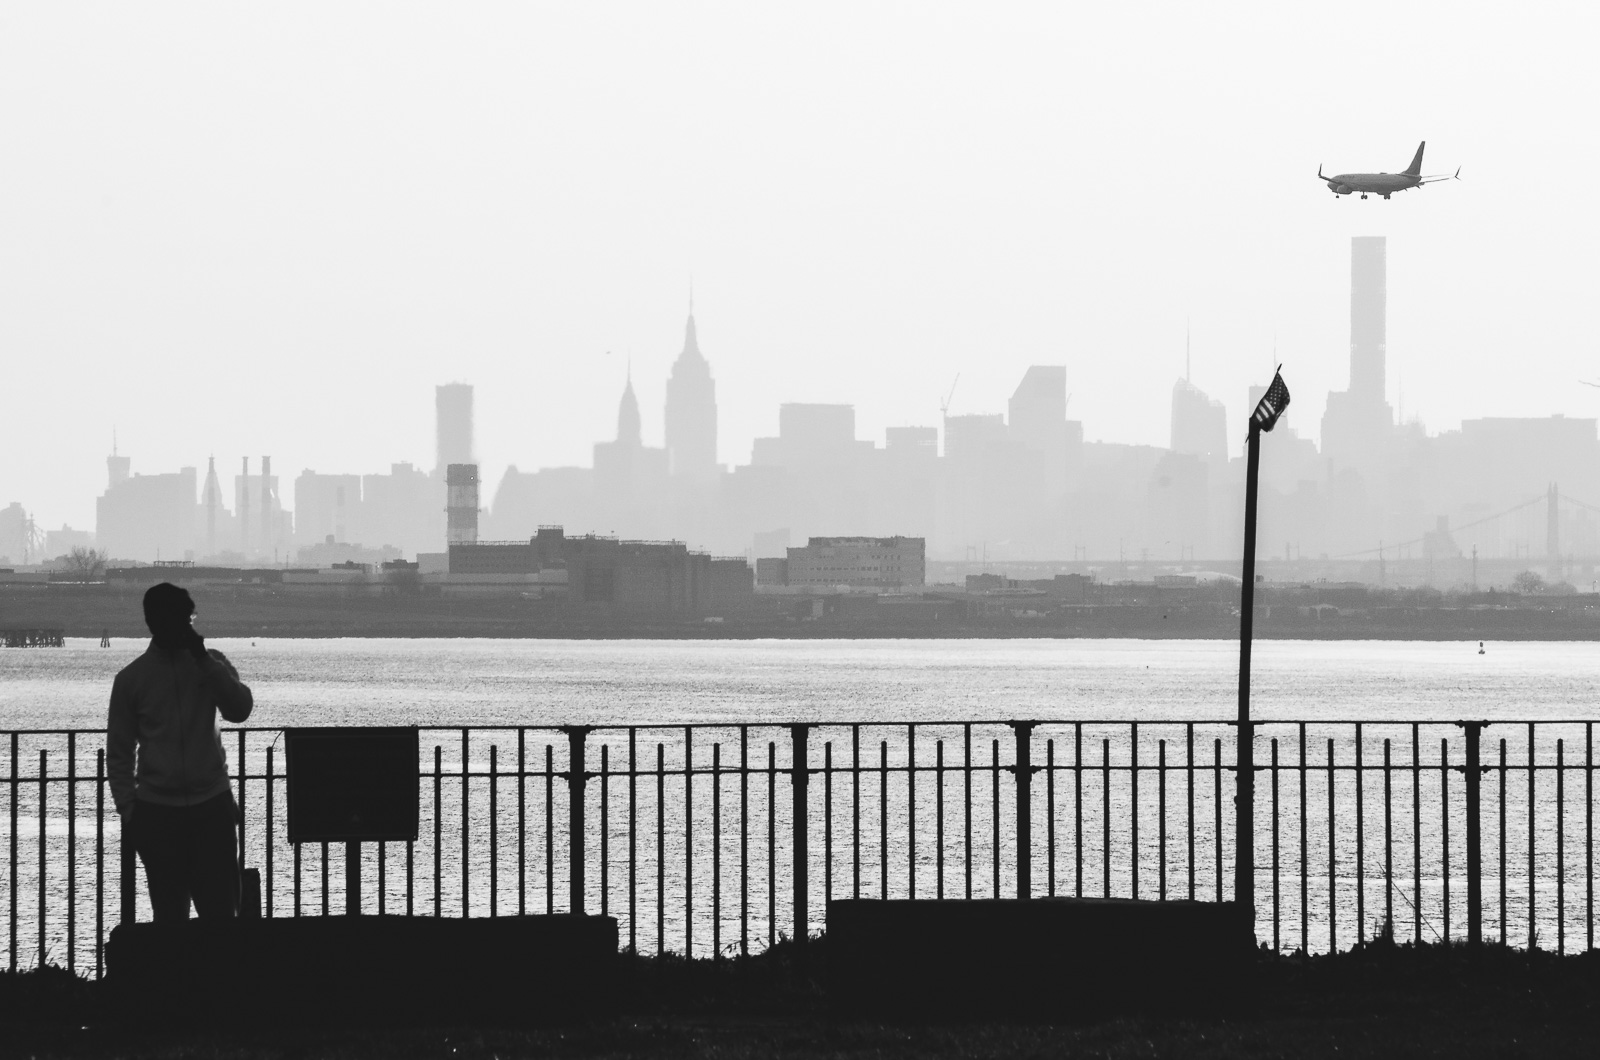 A man watches an Airplane flying over the distant Skyline of Manhattan to land on the LaGuardia Airport.